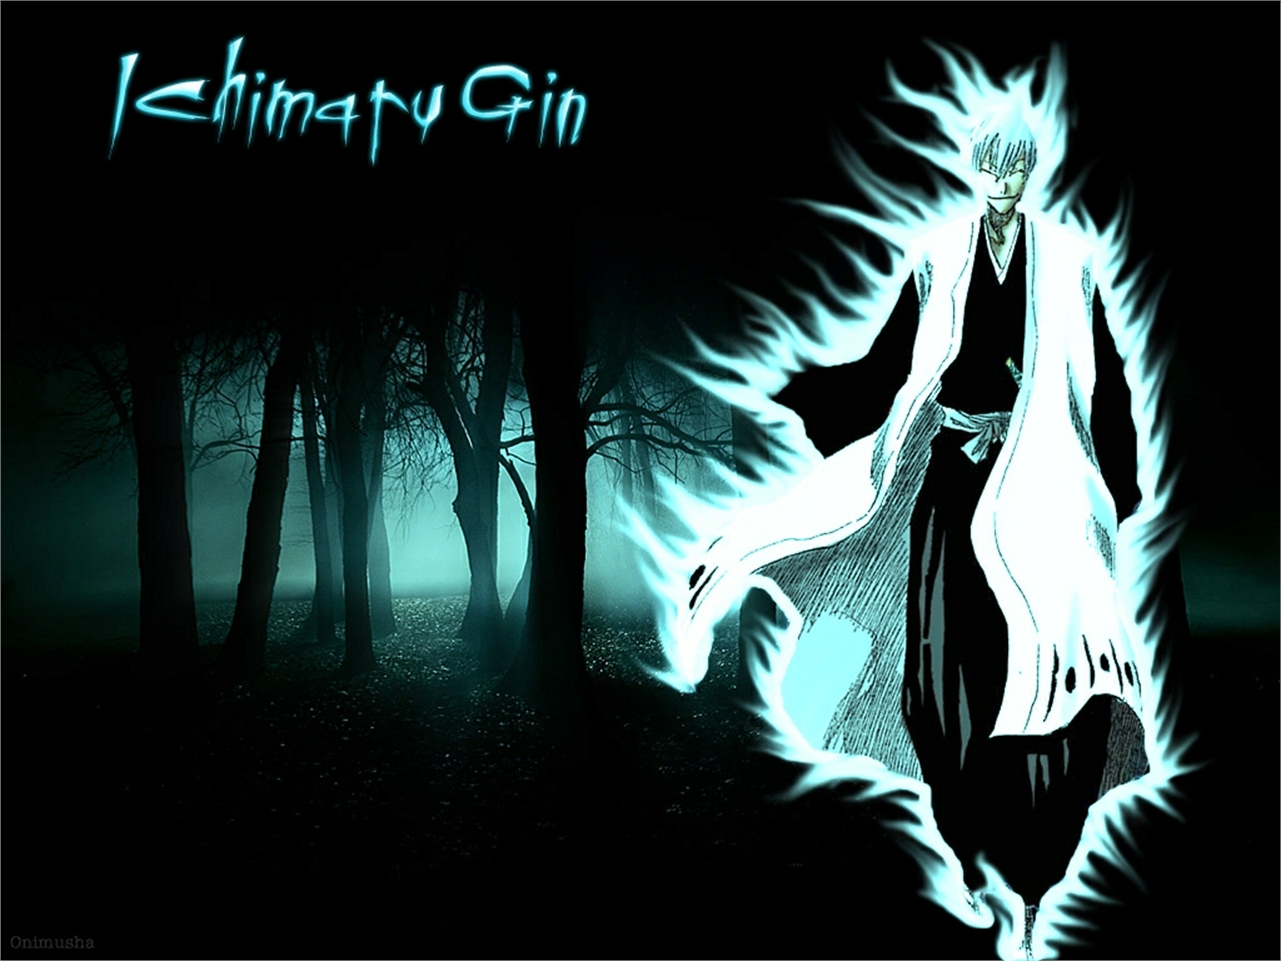 gin wallpaper,text,darkness,font,graphic design,tree